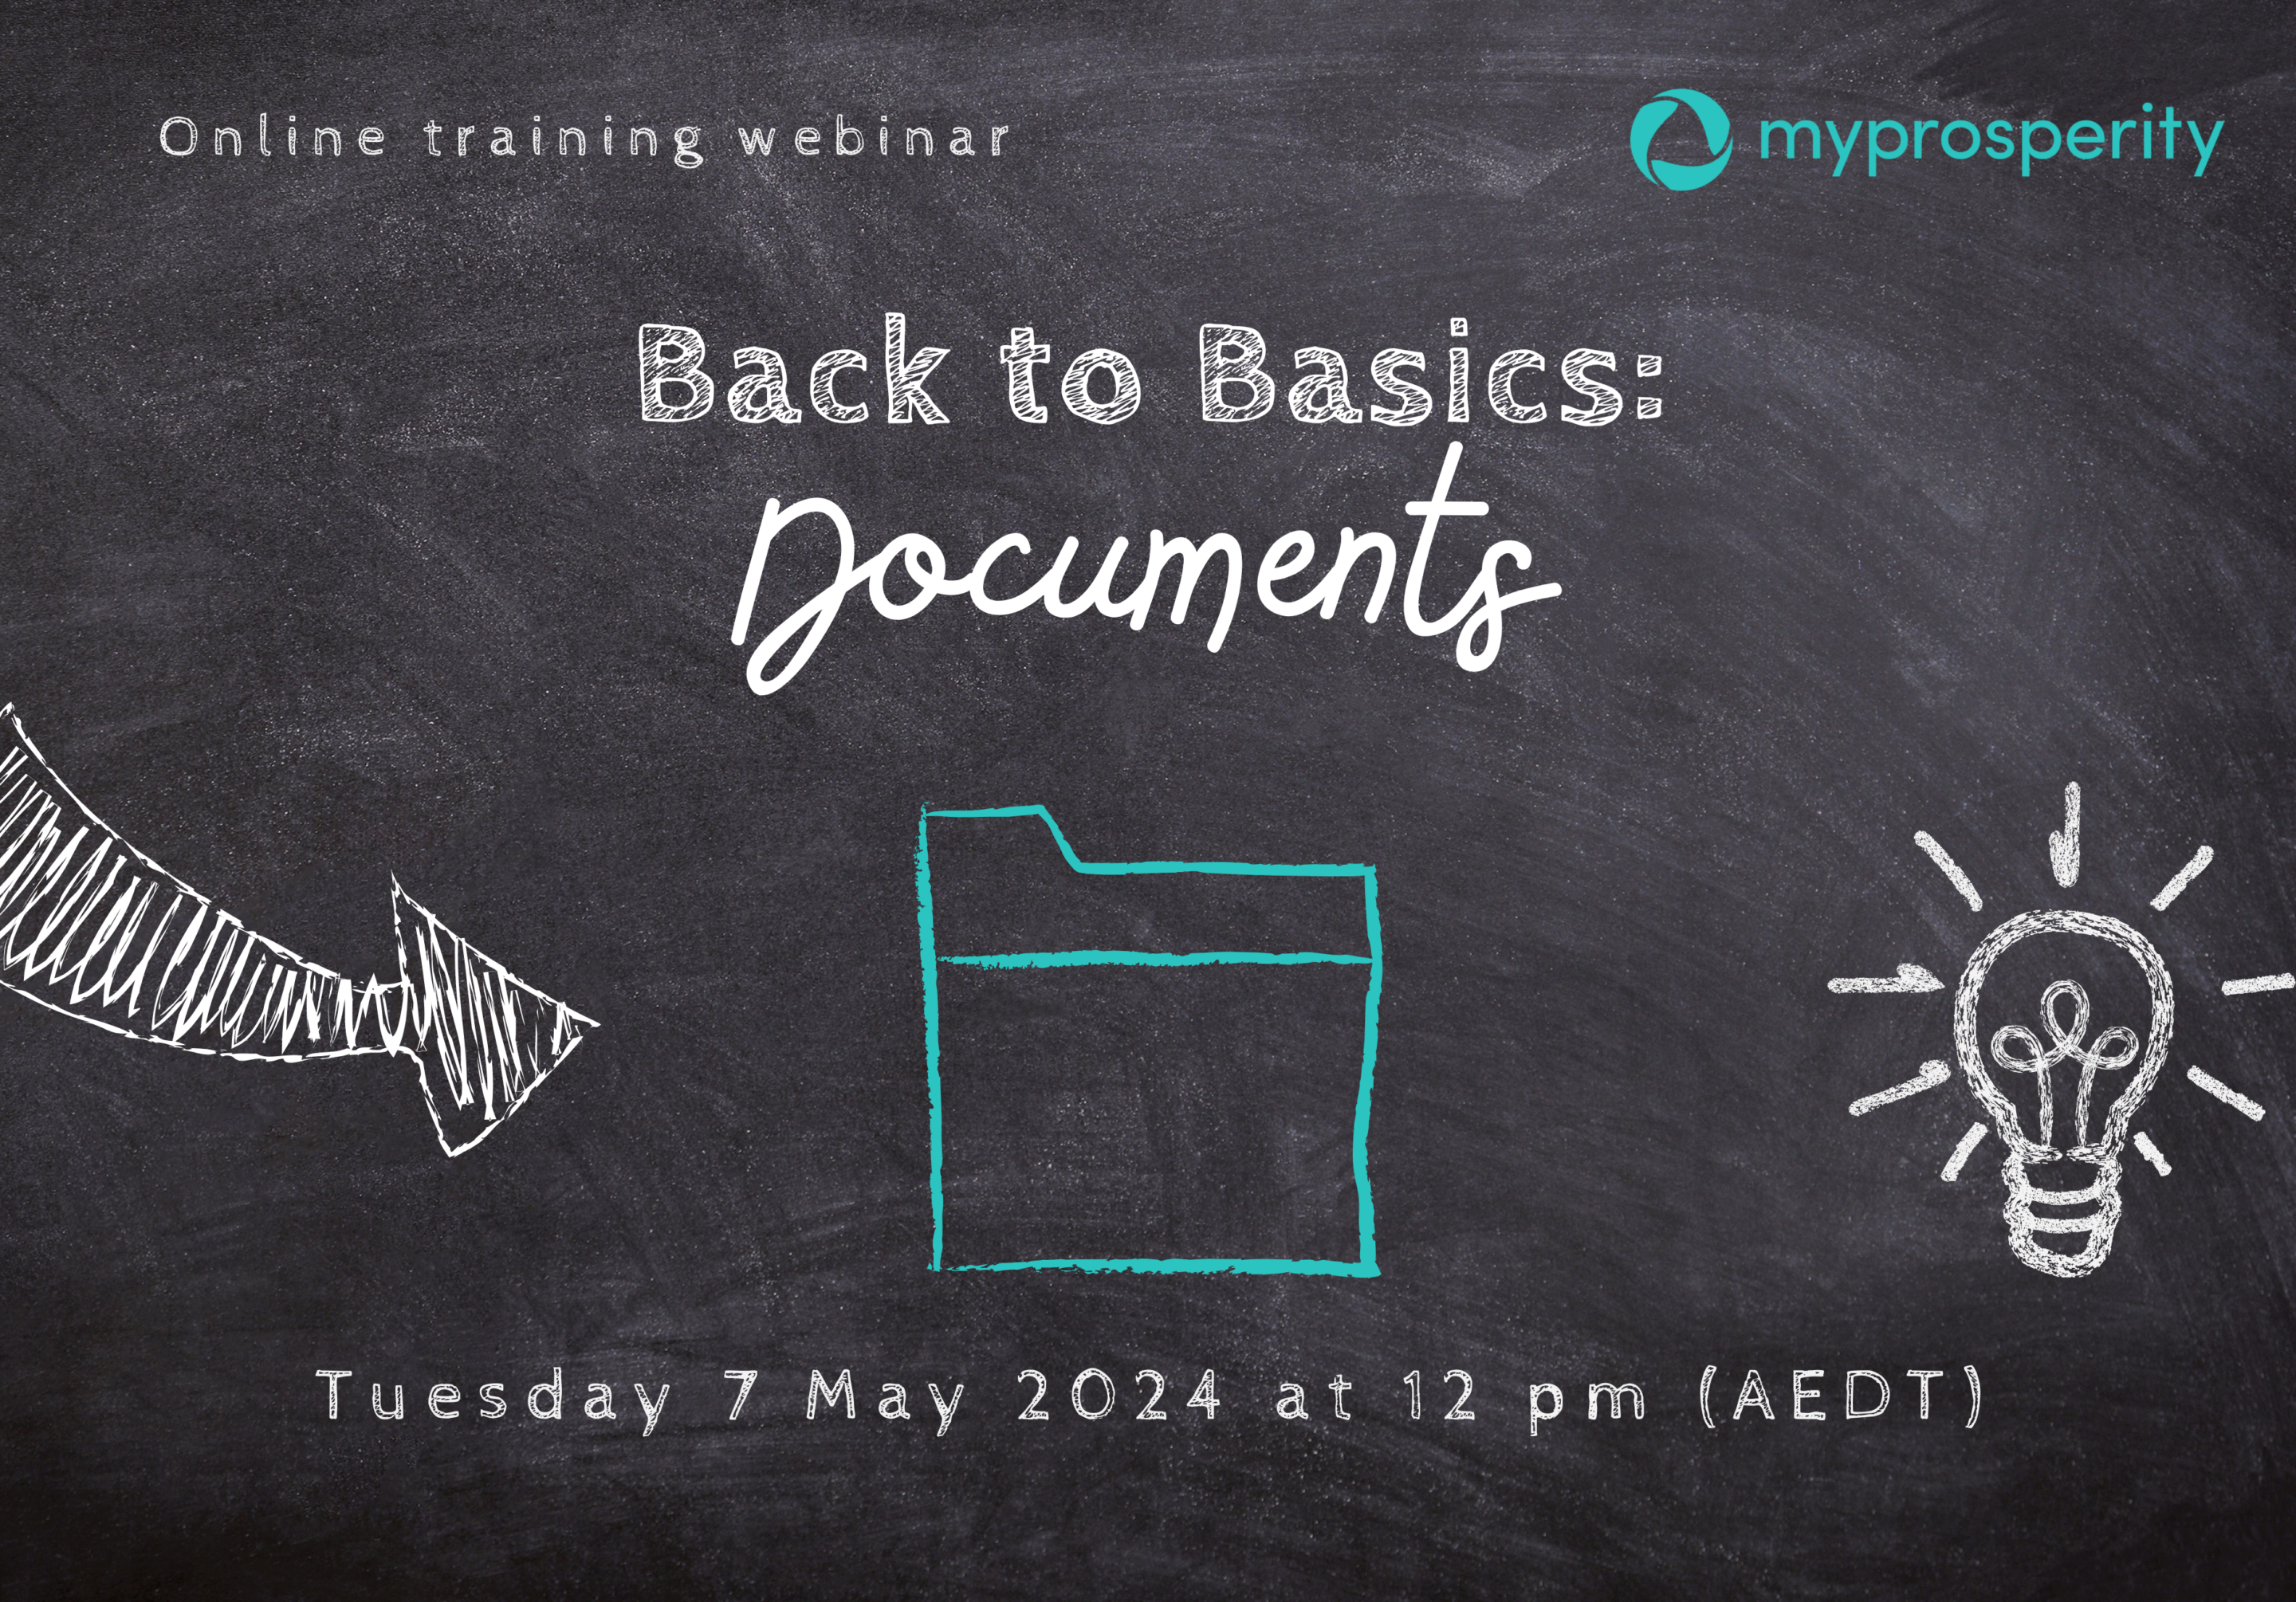 All about documents training webinar